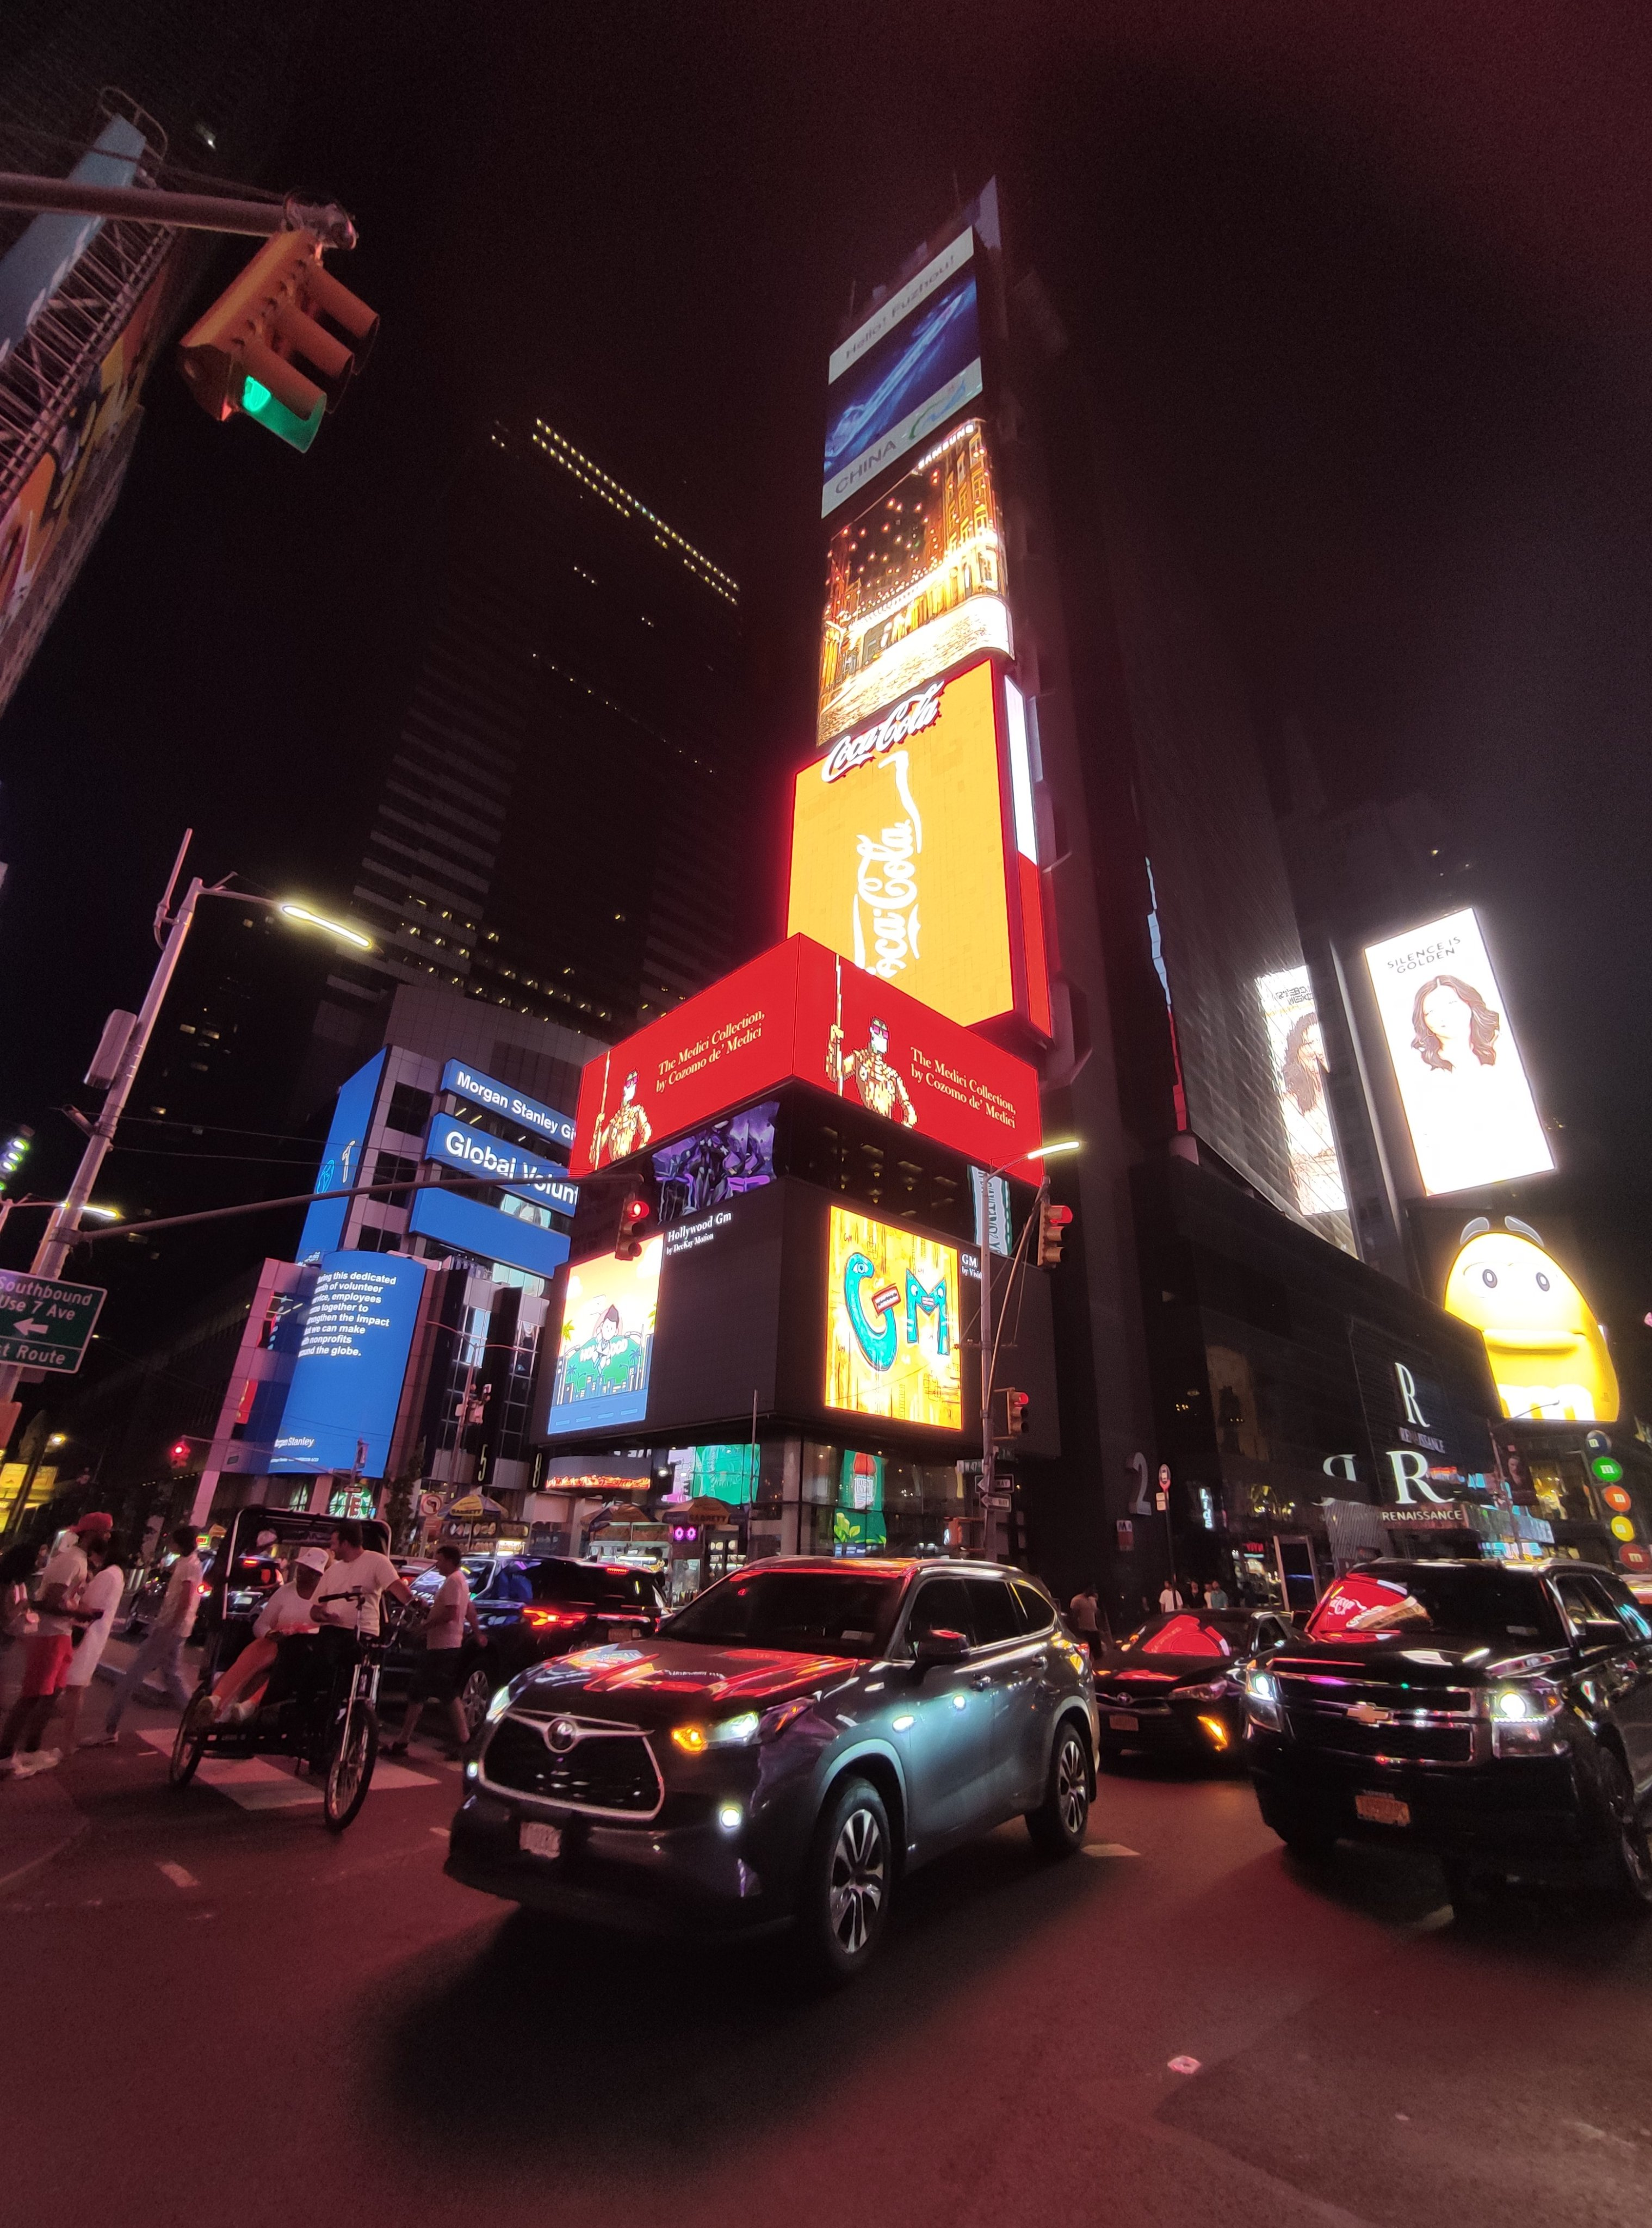 Visithra is the first malaysian to display nft art in new york's times square